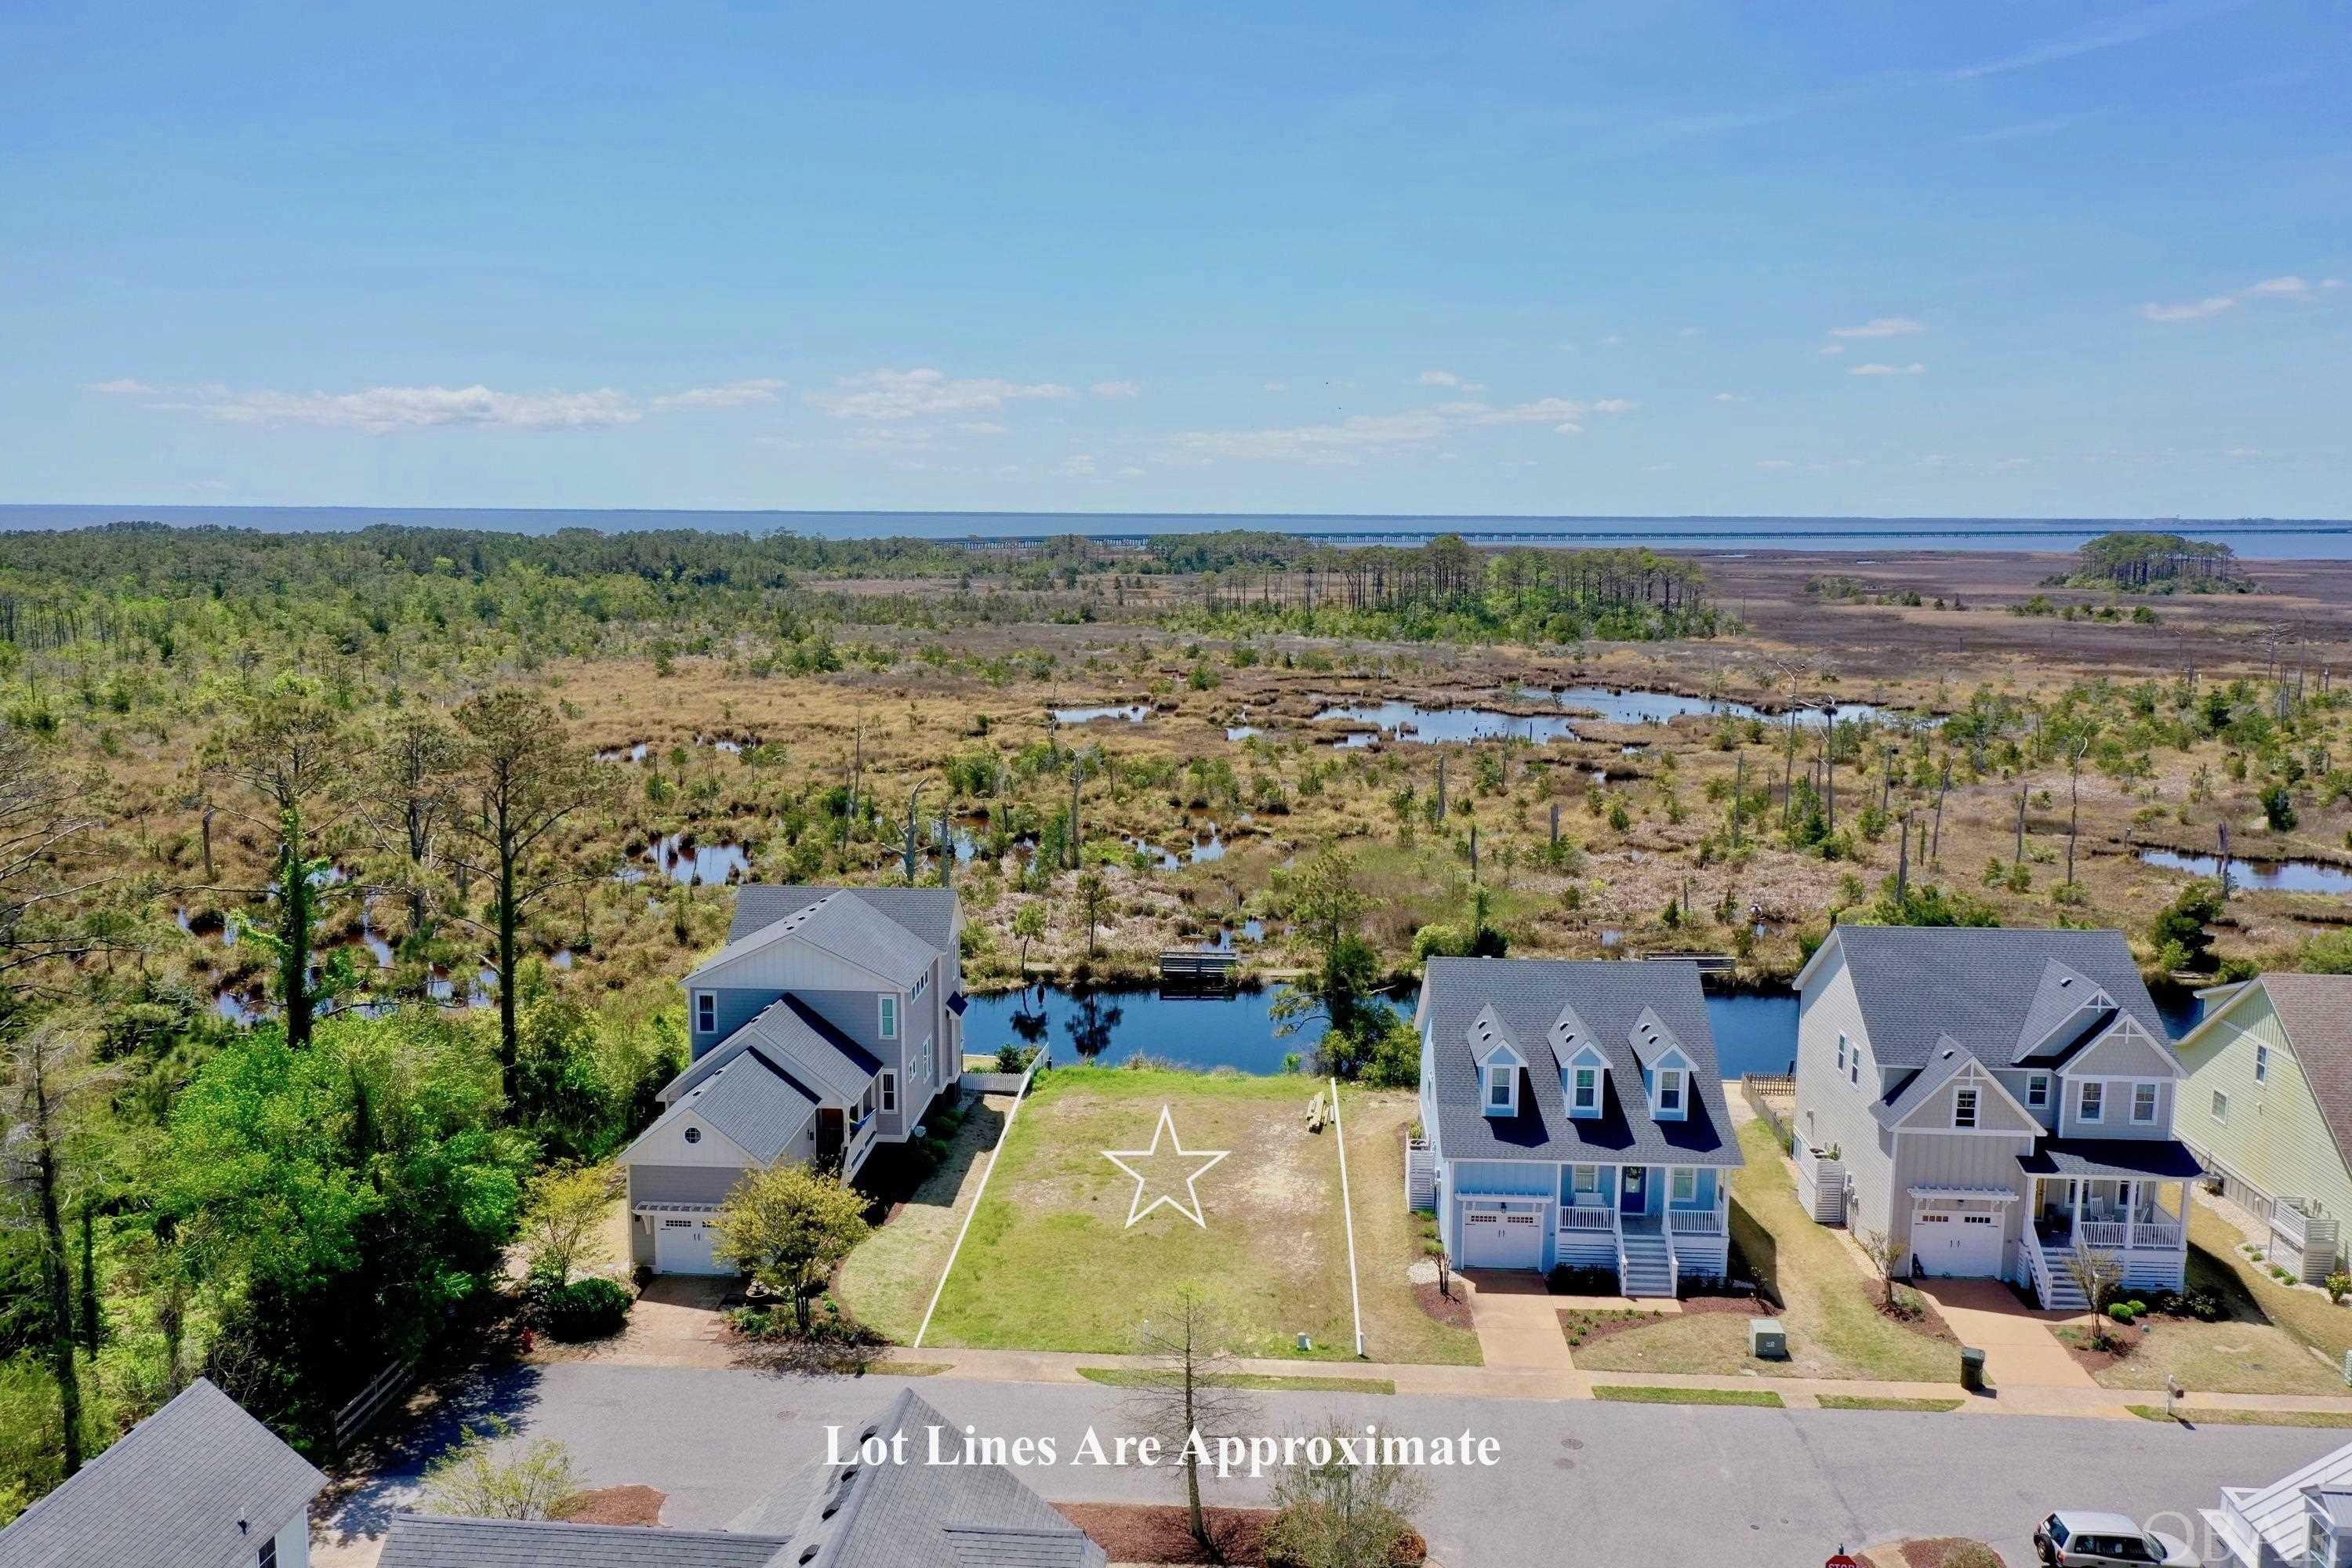 One of the few homesites remaining in "Cypress Cove" located in the charming Town of Manteo. Cypress Cove has 32 sites and is an established neighborhood with landscaped properties, homes built in the beloved Manteo Architecture, nature trail, and common areas with views of the salt marsh and Croatan Sound. Manteo is one of the oldest towns in North Carolina, full of history, and rich in culture. Walk or bike to concerts, restaurants, enjoy the Saturday morning Farmers Market, or the Downtown First Friday Celebrations, walk one of the longest contiguous boardwalk in coastal North Carolina, and shop at locally owned boutiques. This level and cleared lot is ready to build on showcasing incredible sunset views and is ideally located on the quiet back side of the community. Enjoy watching the serenity of the pond from your back deck or gazing at all the wildlife playing over the marsh. Only minutes from the beach, downtown Manteo, and the Roanoke Island Festival Park. Municipal Water and Sewer is available. The HOA fee is $520 for vacant properties and includes landscape maintenance, for improved properties the fee is $1,750 and again, includes landscape maintenance and common areas. Please note the sewer impact fee for the first two bedrooms has been paid totaling $1,920. Don't forget to check out the virtual tour link for aerial video.